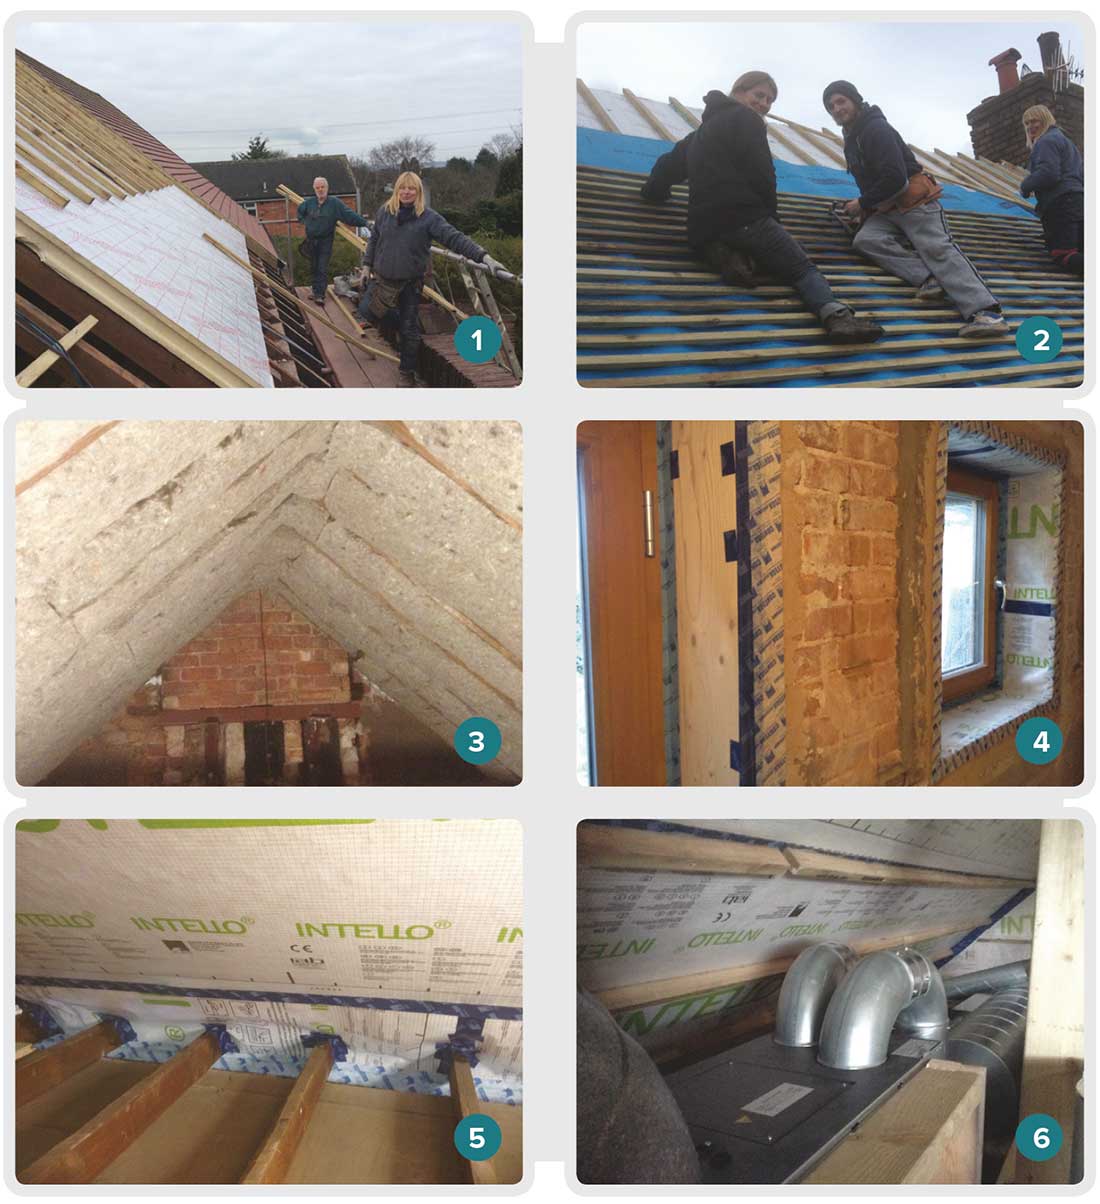 1 & 2 Roof build-up includes plain tiles followed inside by battens with pro clima Solitex taped wind-tightness membrane over counter battens, over Xtratherm Thin-R 100mm boards; 3 100mm Thermafleece UltraWool between rafters; 4 airtightness taping and membrane around windows, with the original brickwork still exposed internally; 5 further taping around joist ends; 6 Paul Focus 200 heat recovery ventilation system.